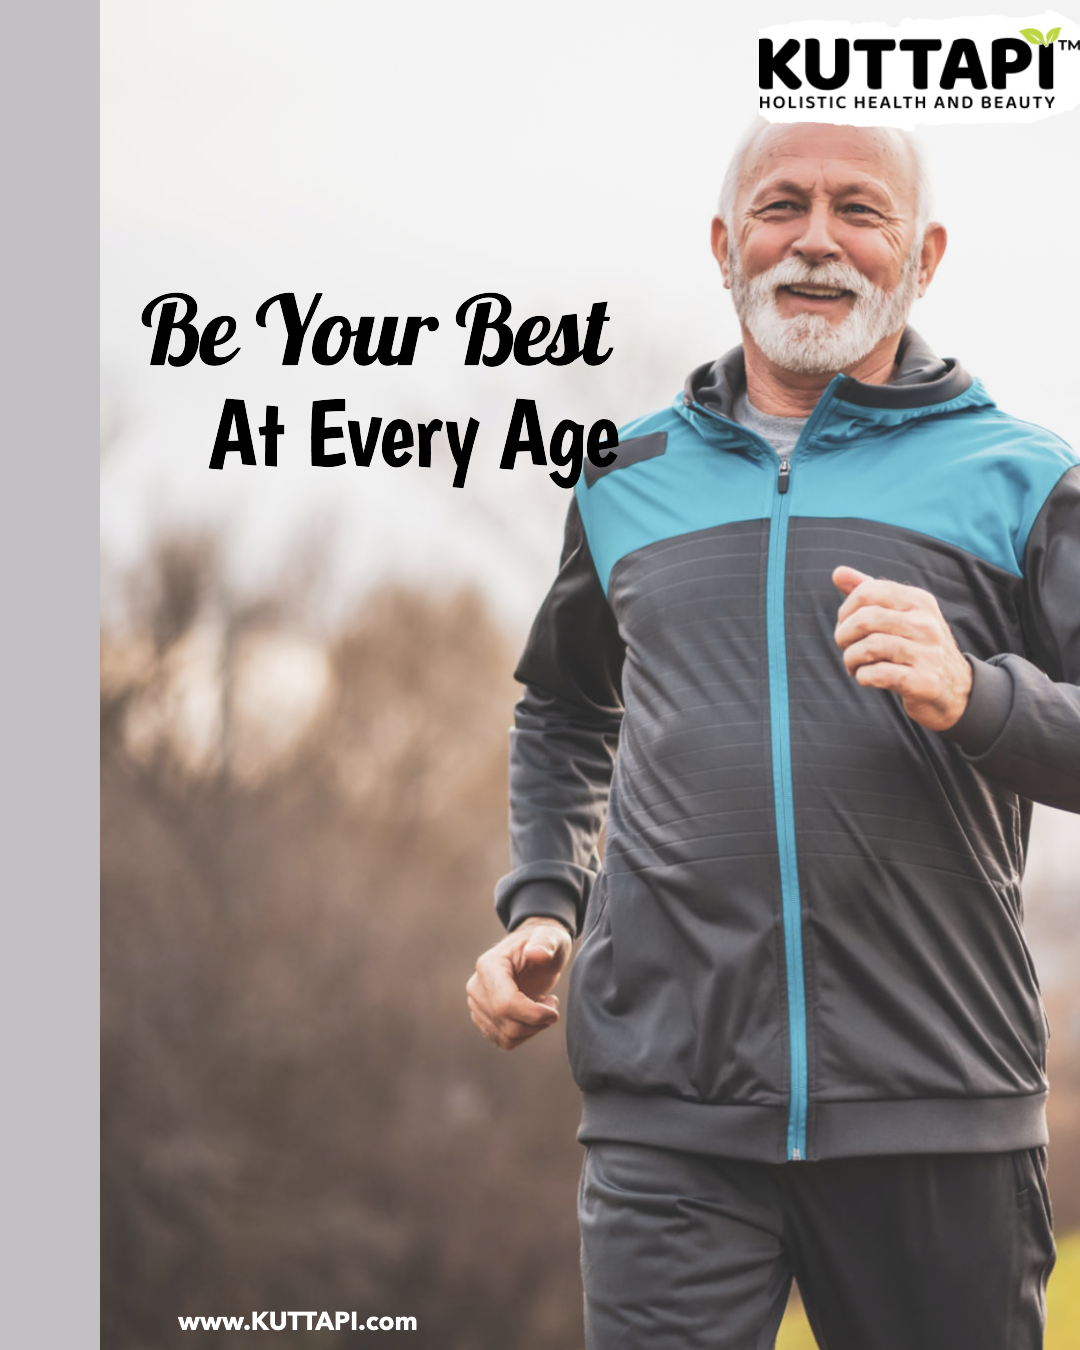 "Be Your Best At Every Age"